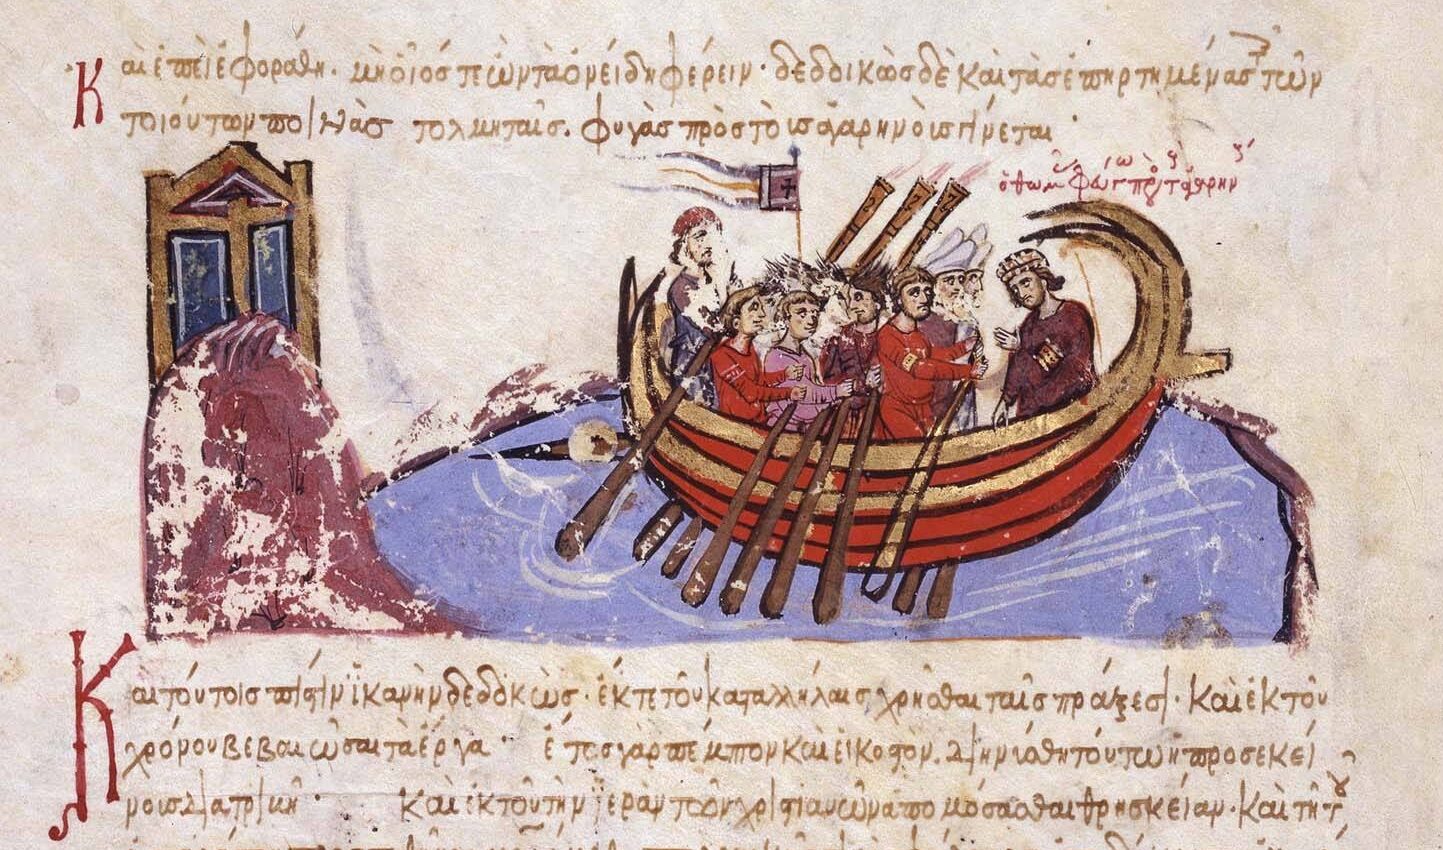 Safe Travels: Taming the Seas through Image, Word, and Sacred Matter in Byzantium